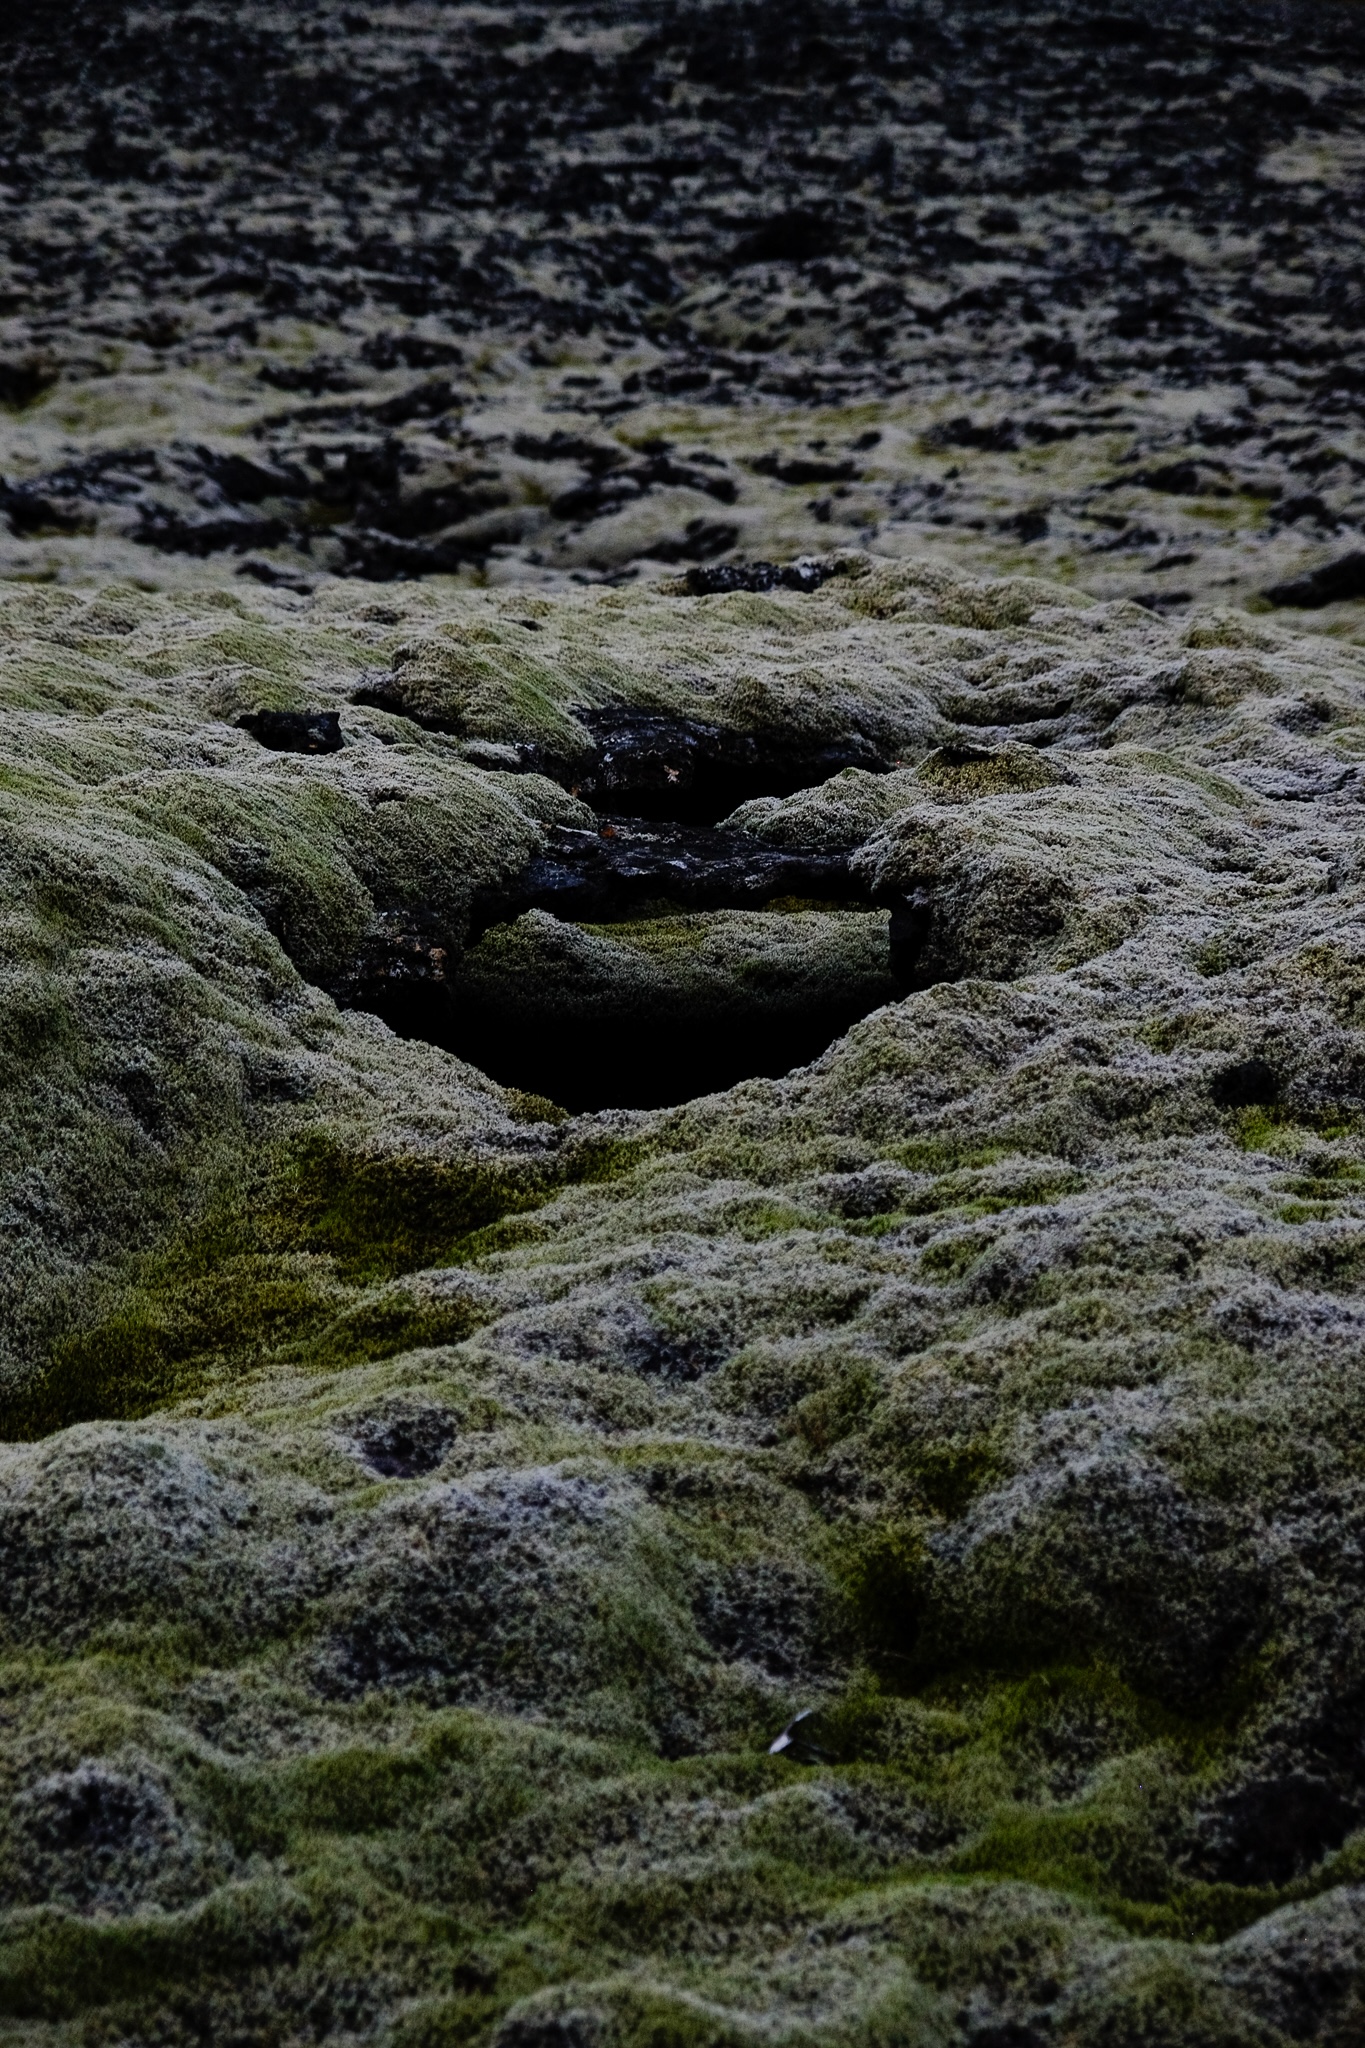 Volcanic rock with green and white moss growing over it form a hole illustrating the danger of walking over moss covered volcanic rock as you may fall in